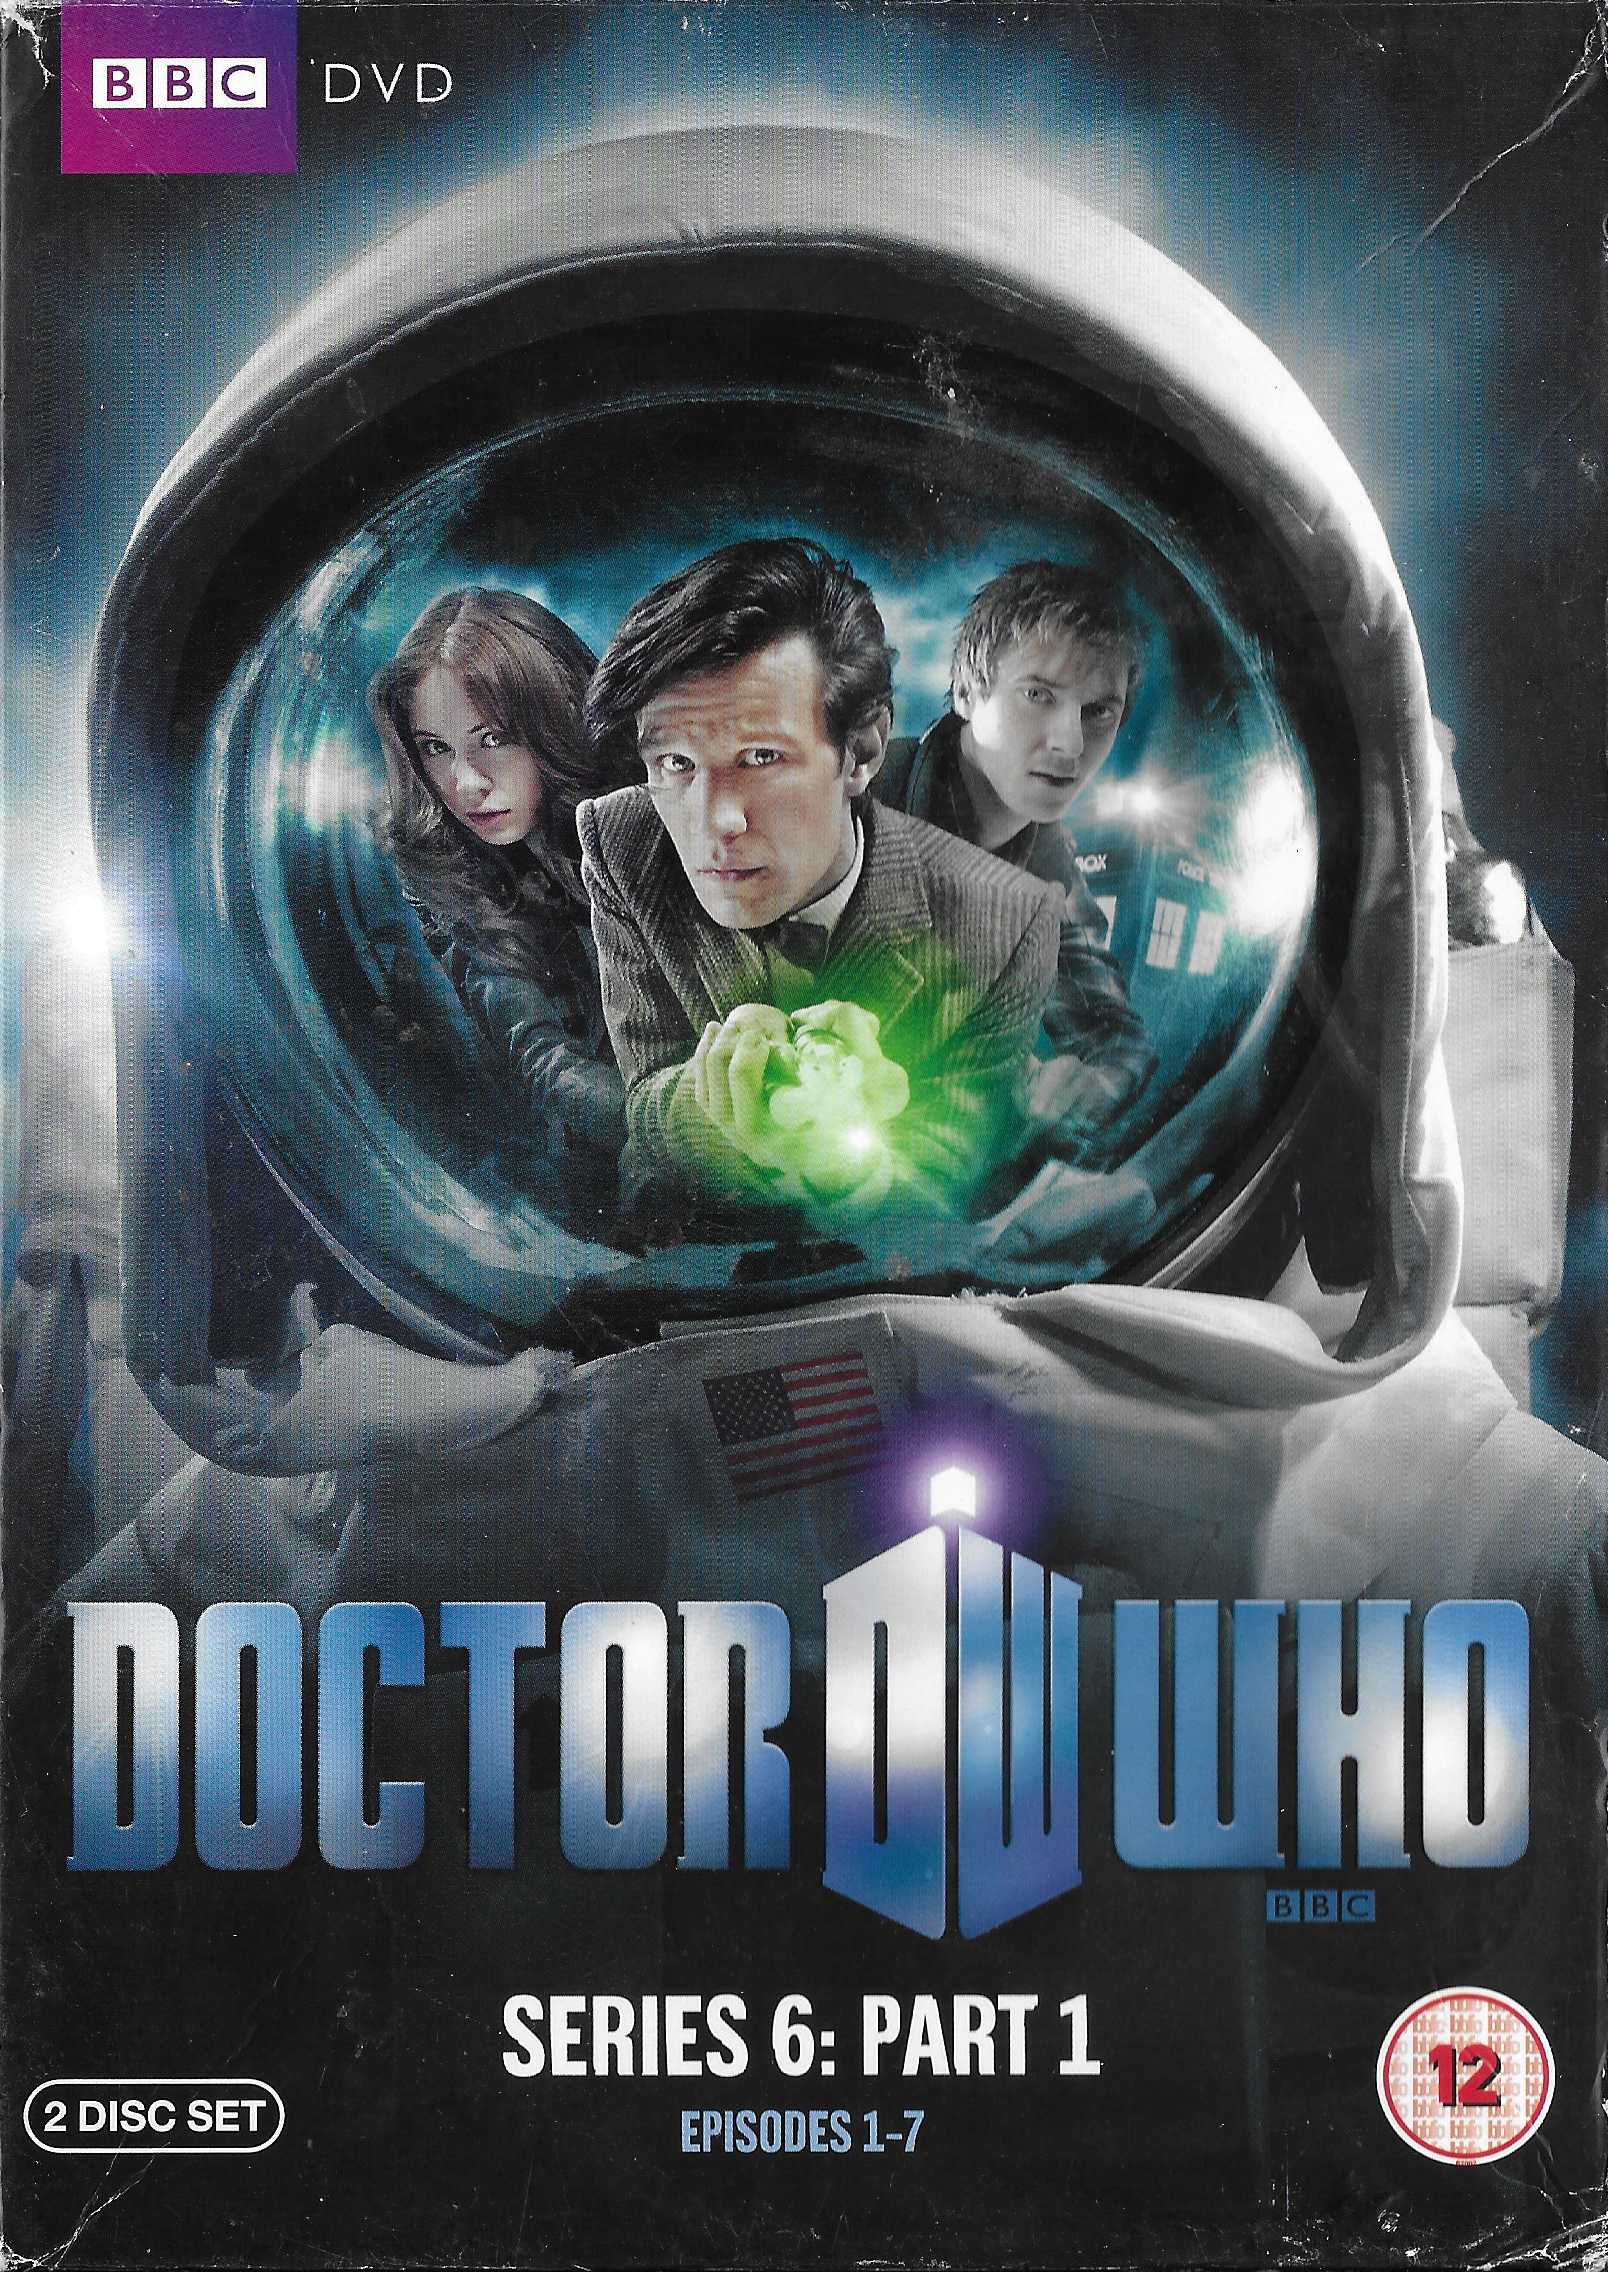 Picture of BBCDVD 3428 Doctor Who - Series 6, volume 1 by artist Steven Moffat / Stephen Thompson / Neil Gaiman / Matthew Graham from the BBC dvds - Records and Tapes library